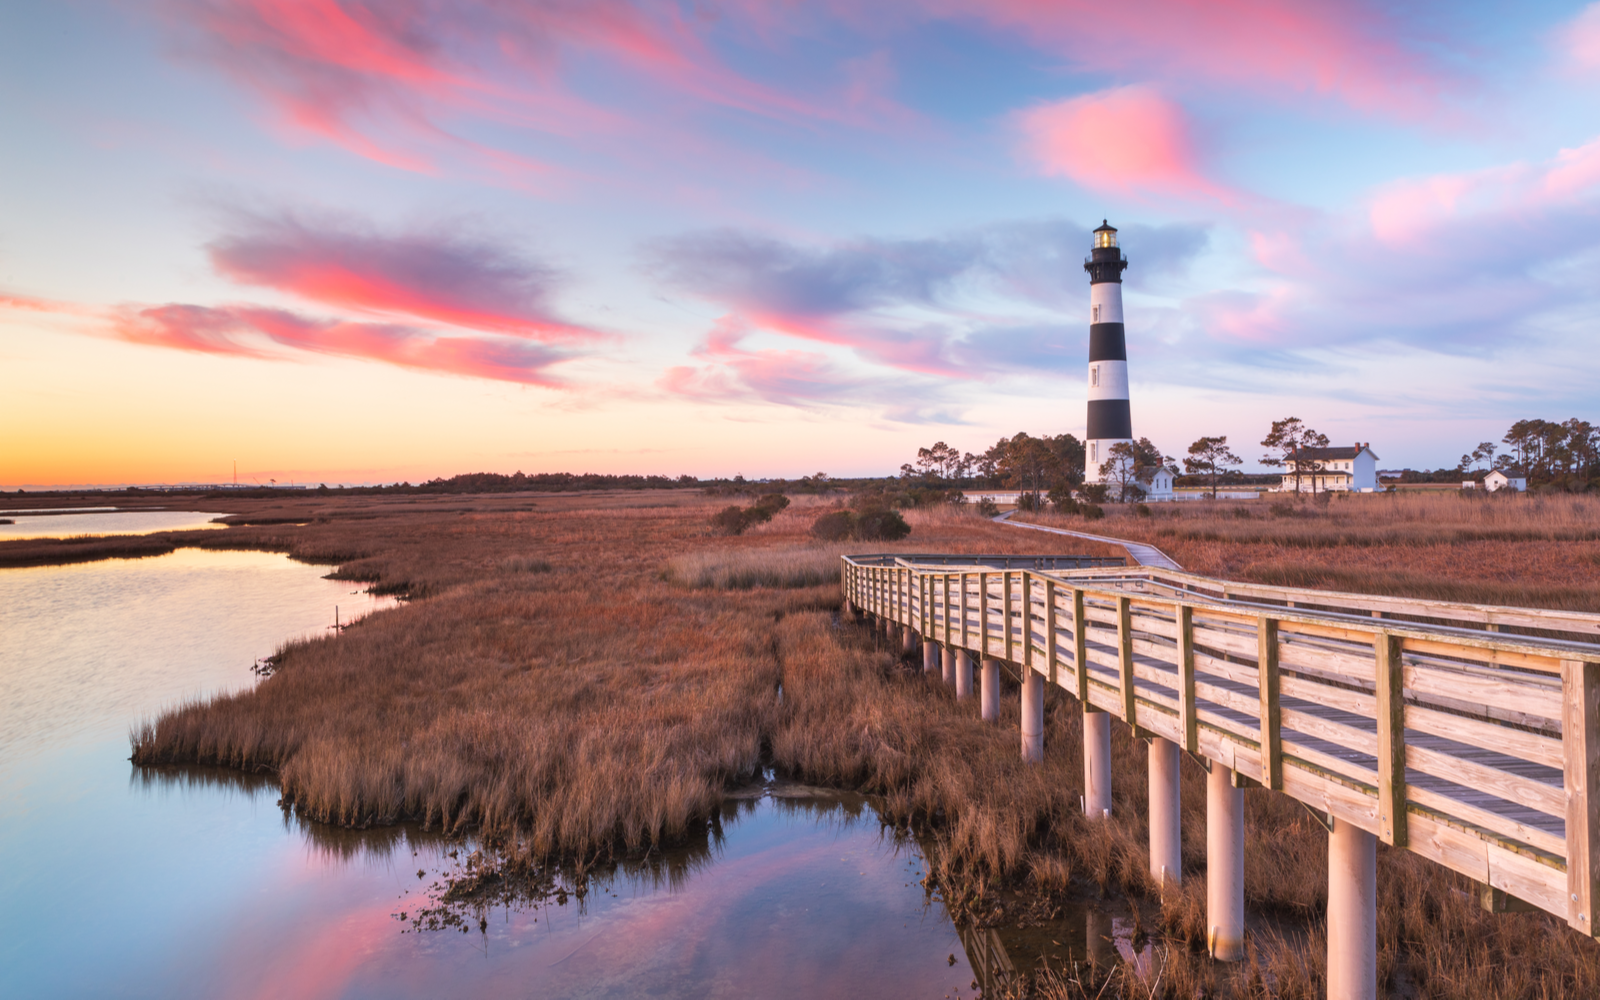 Gorgeous view of a lighthouse and marsh in the outer banks, one of the best places to visit in North Carolina